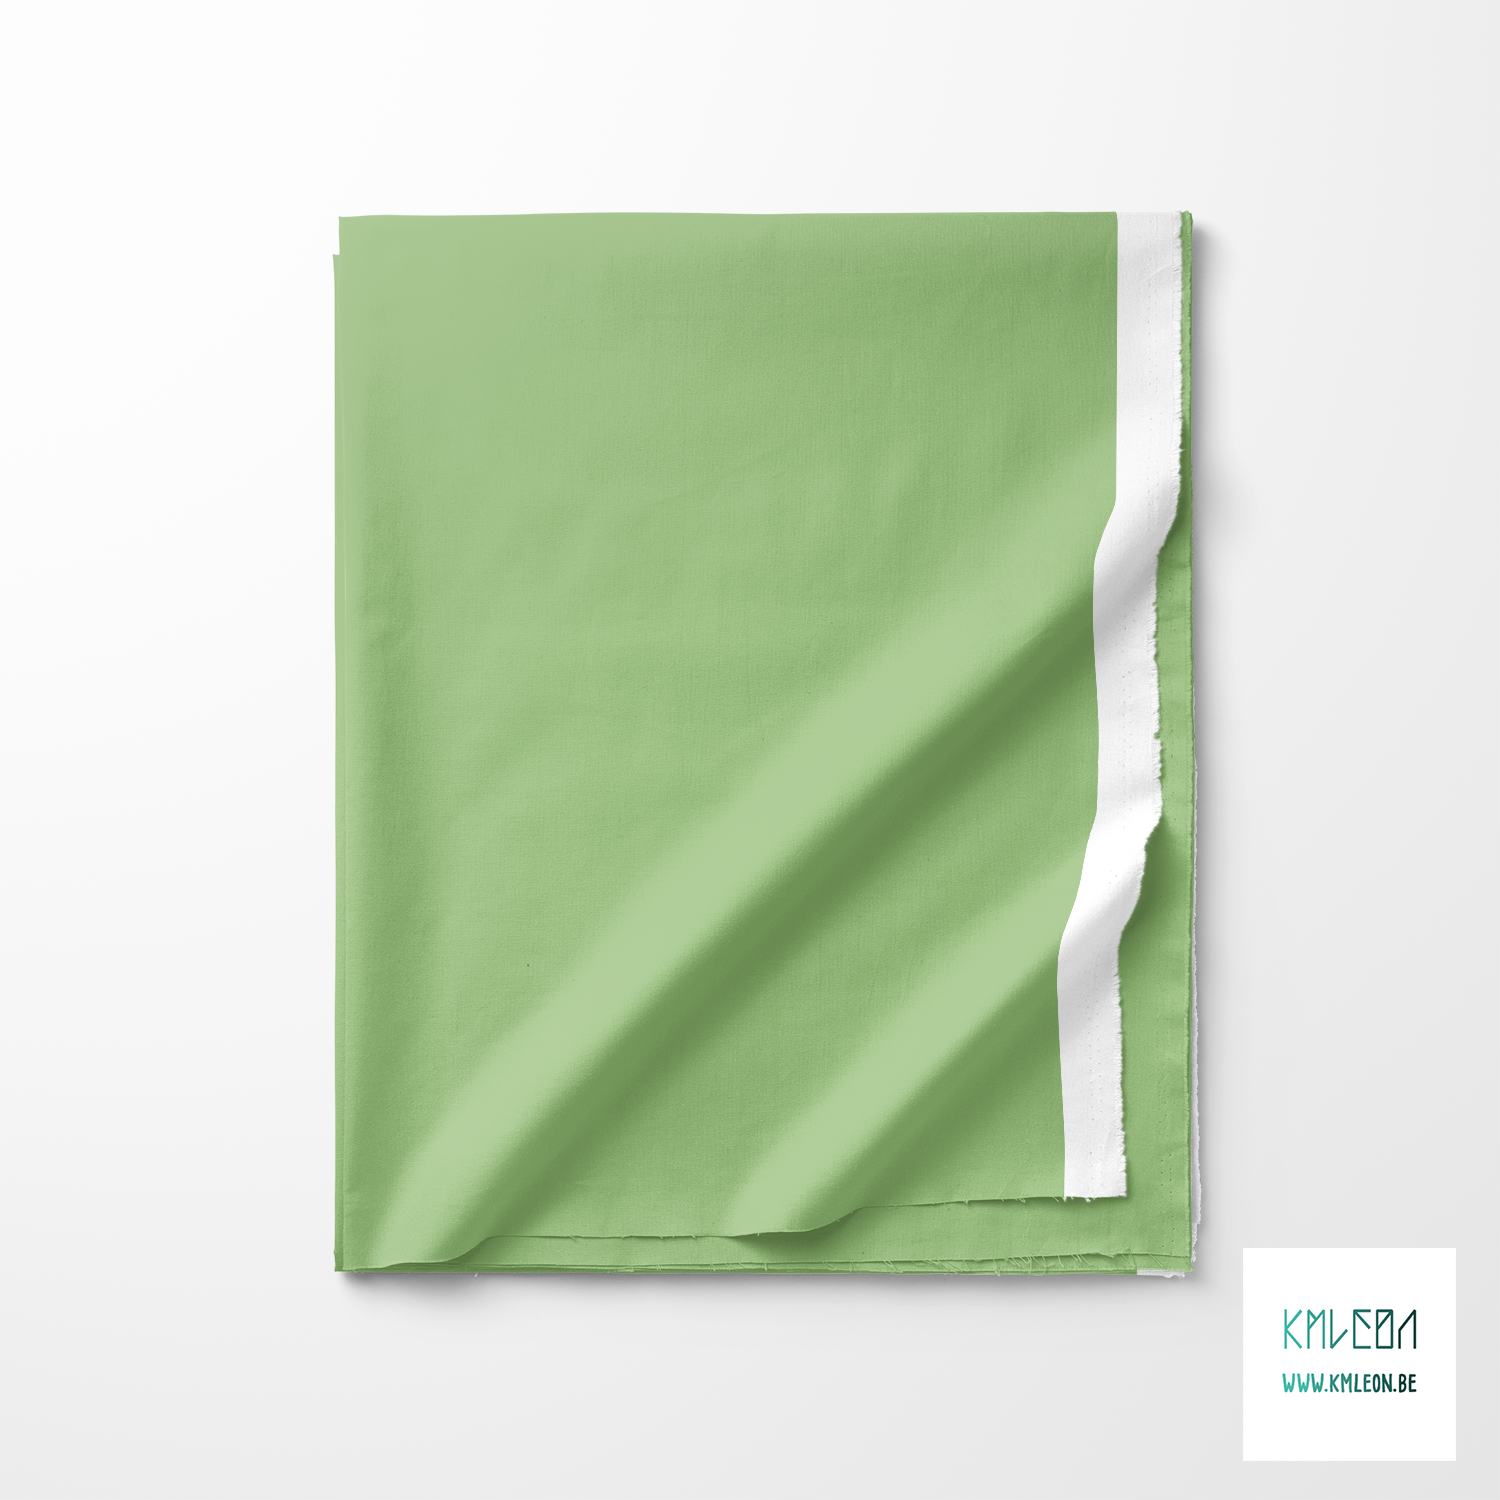 Solid Norway green fabric